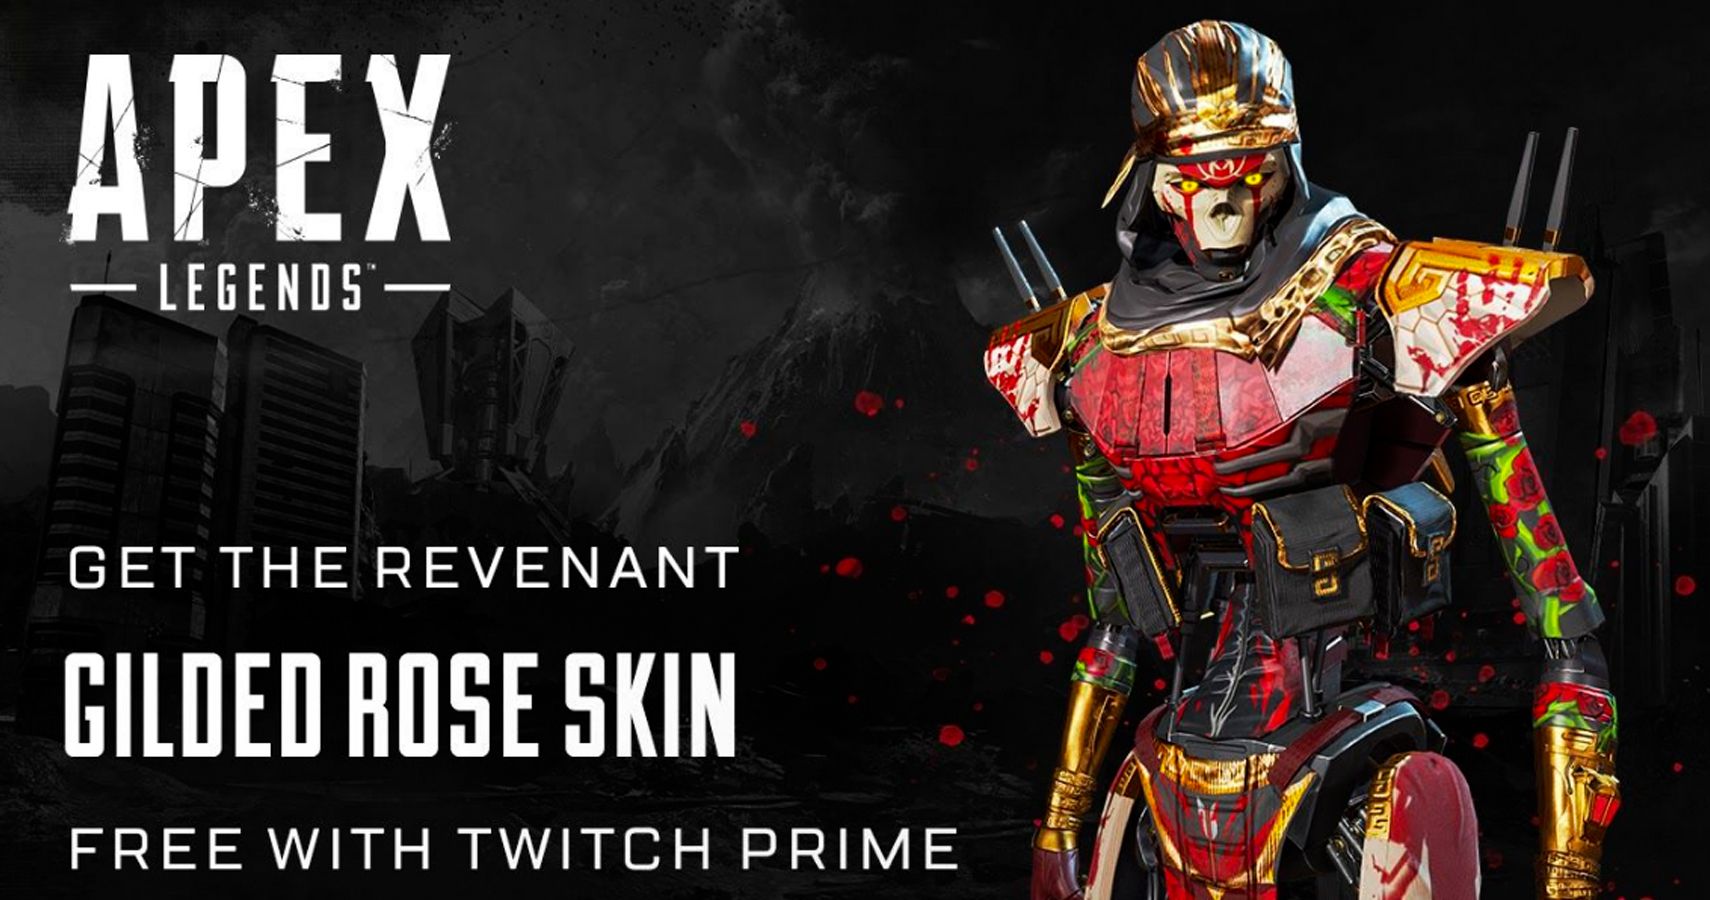 Twitch Prime Loot for April